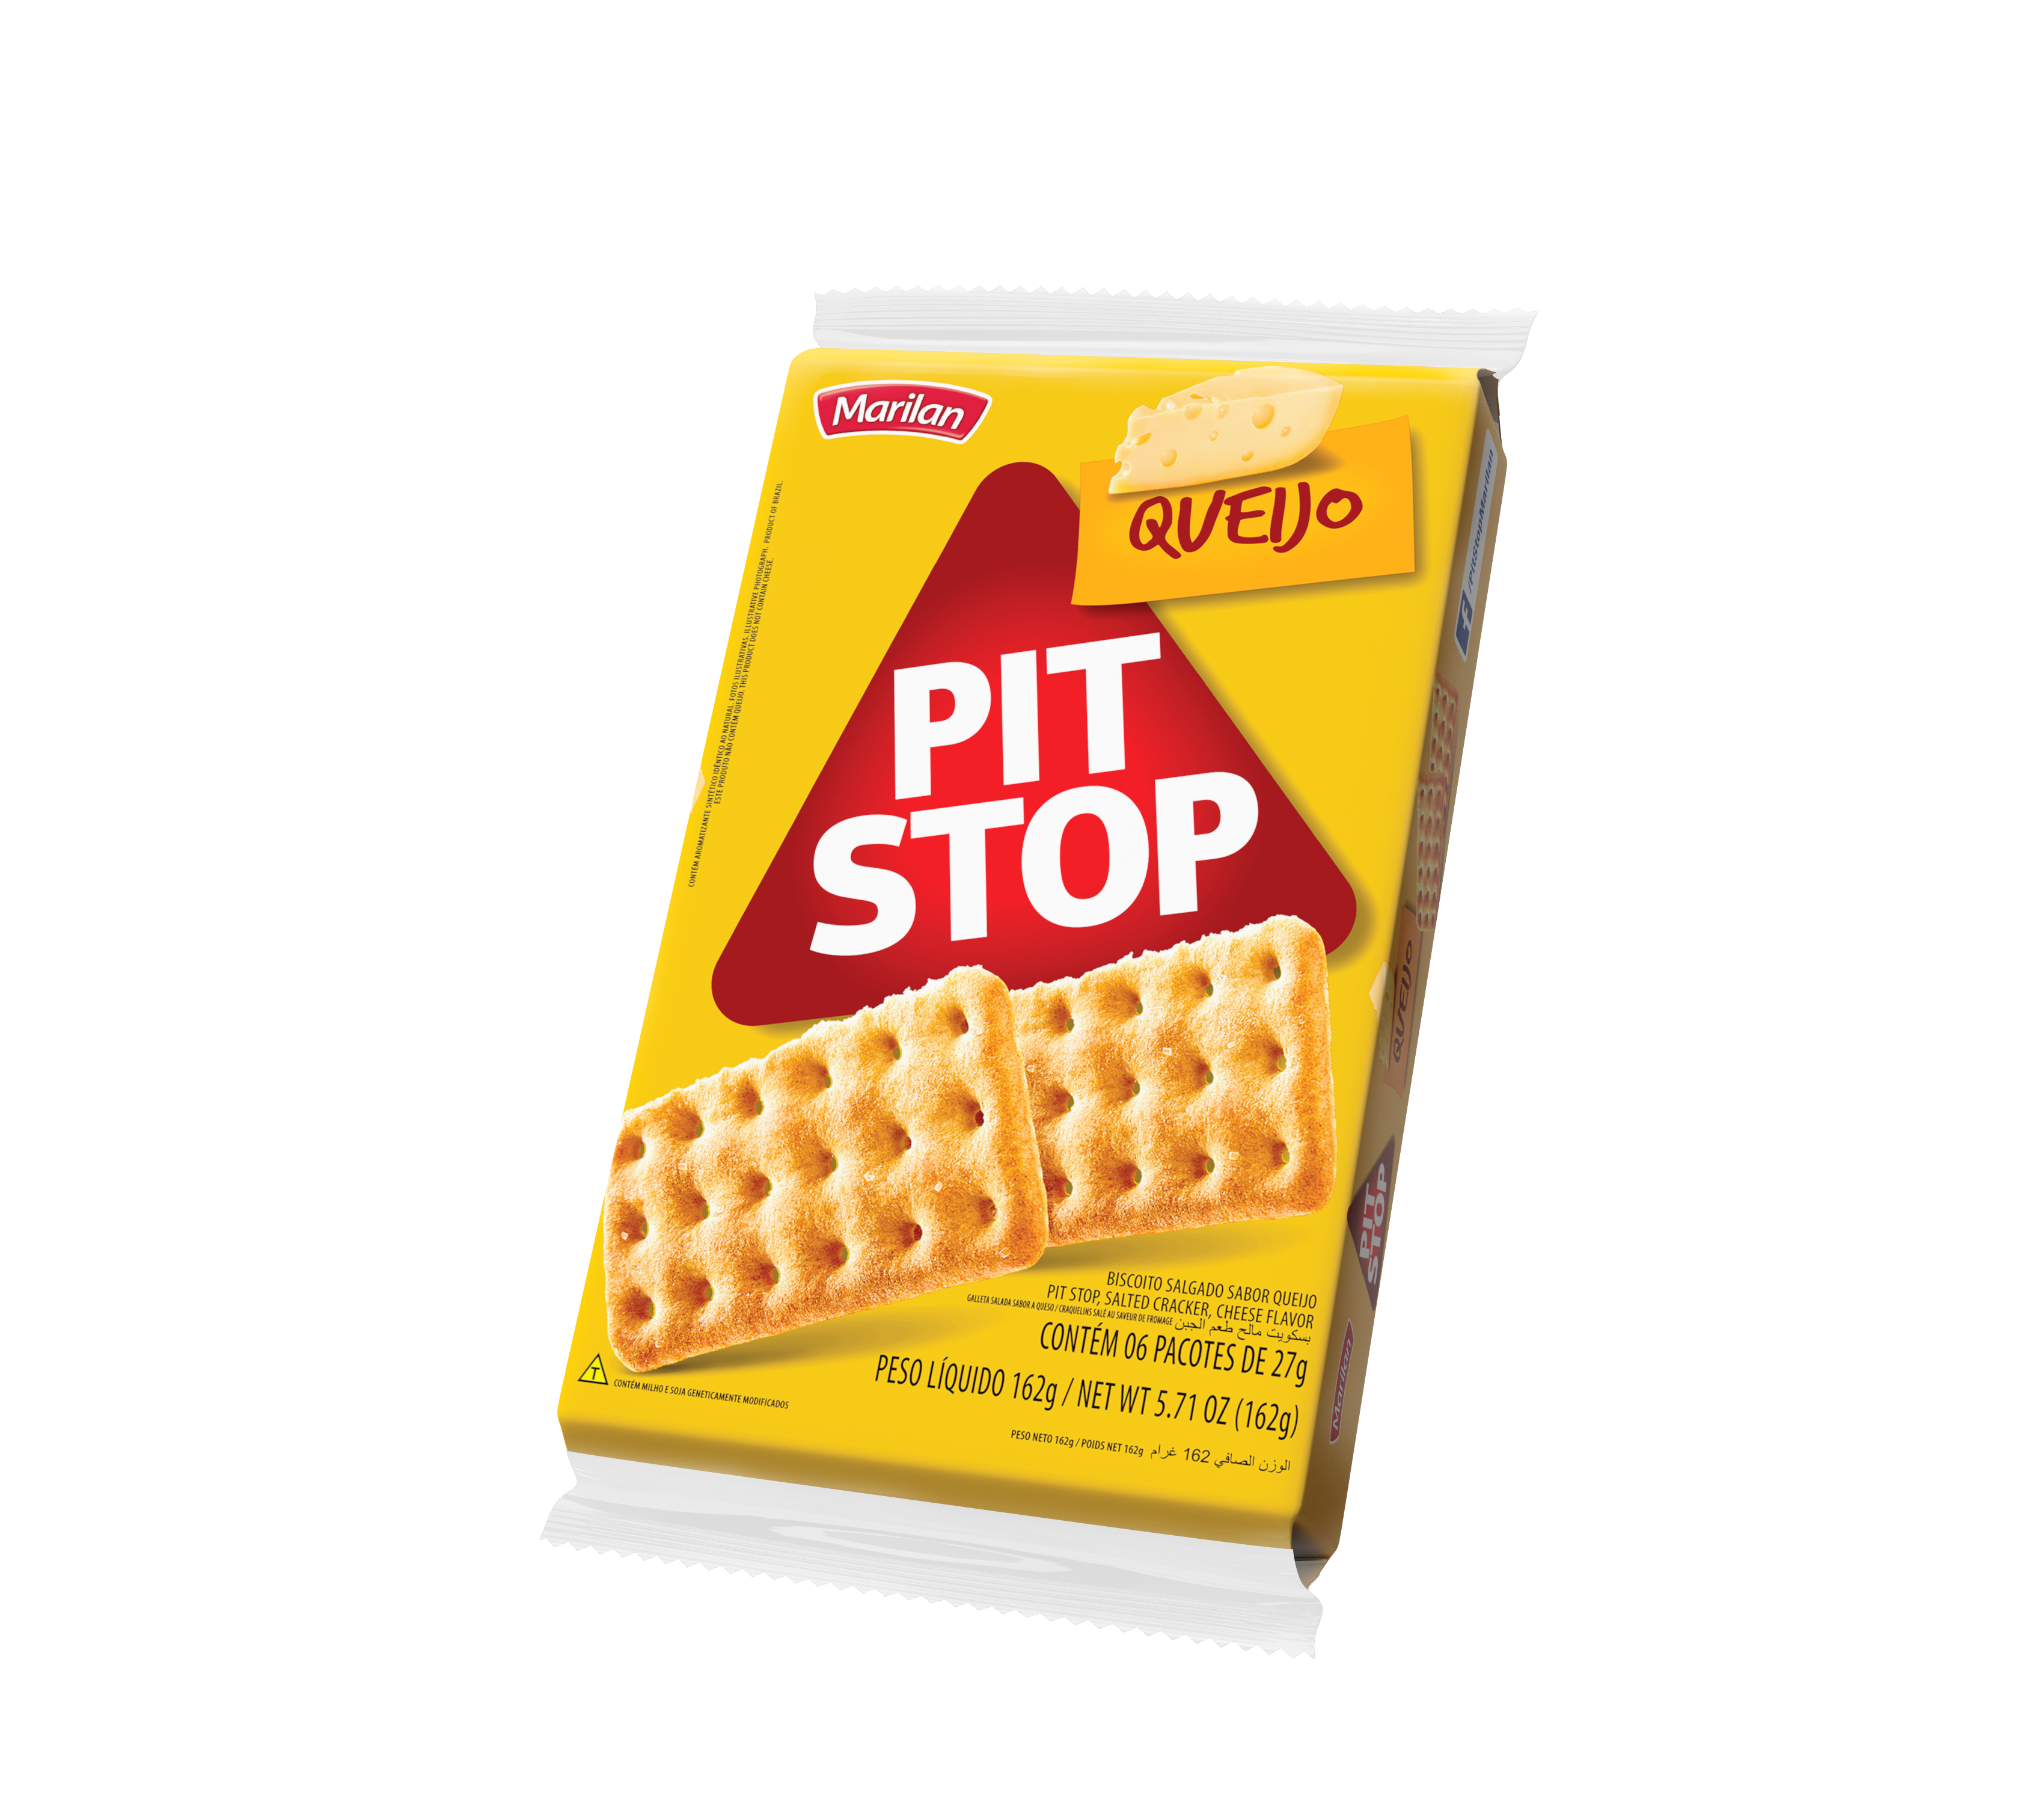 7896003739459 - PACK BISCOITO QUEIJO MARILAN PIT STOP PACOTE 137G 6 UNIDADES